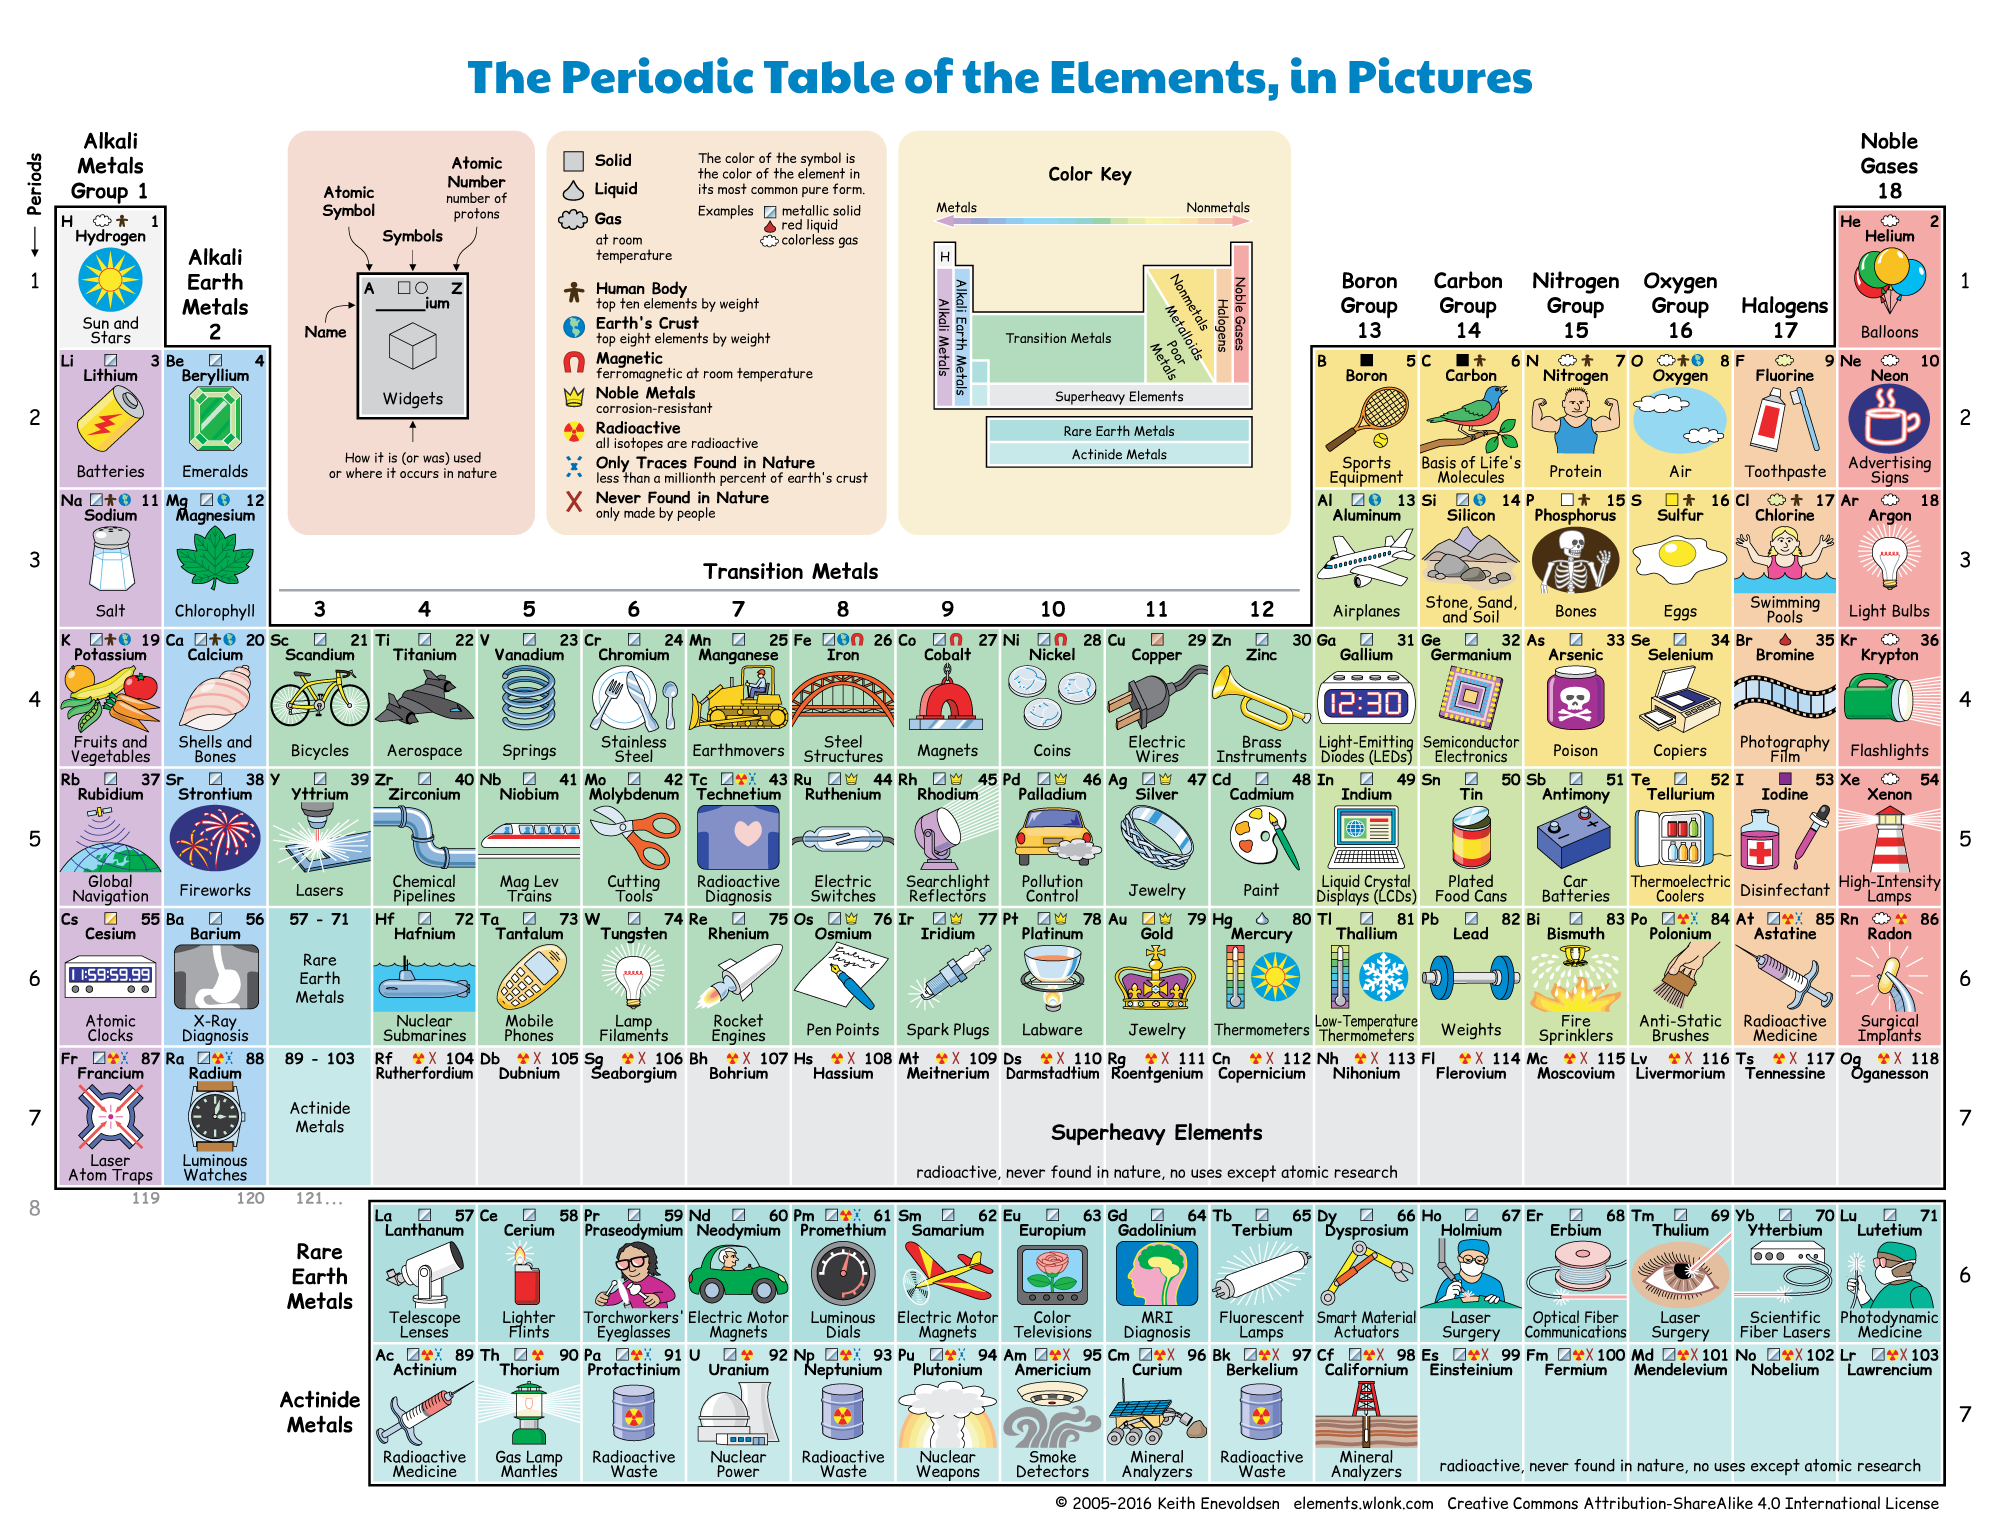 The periodic table in pictures